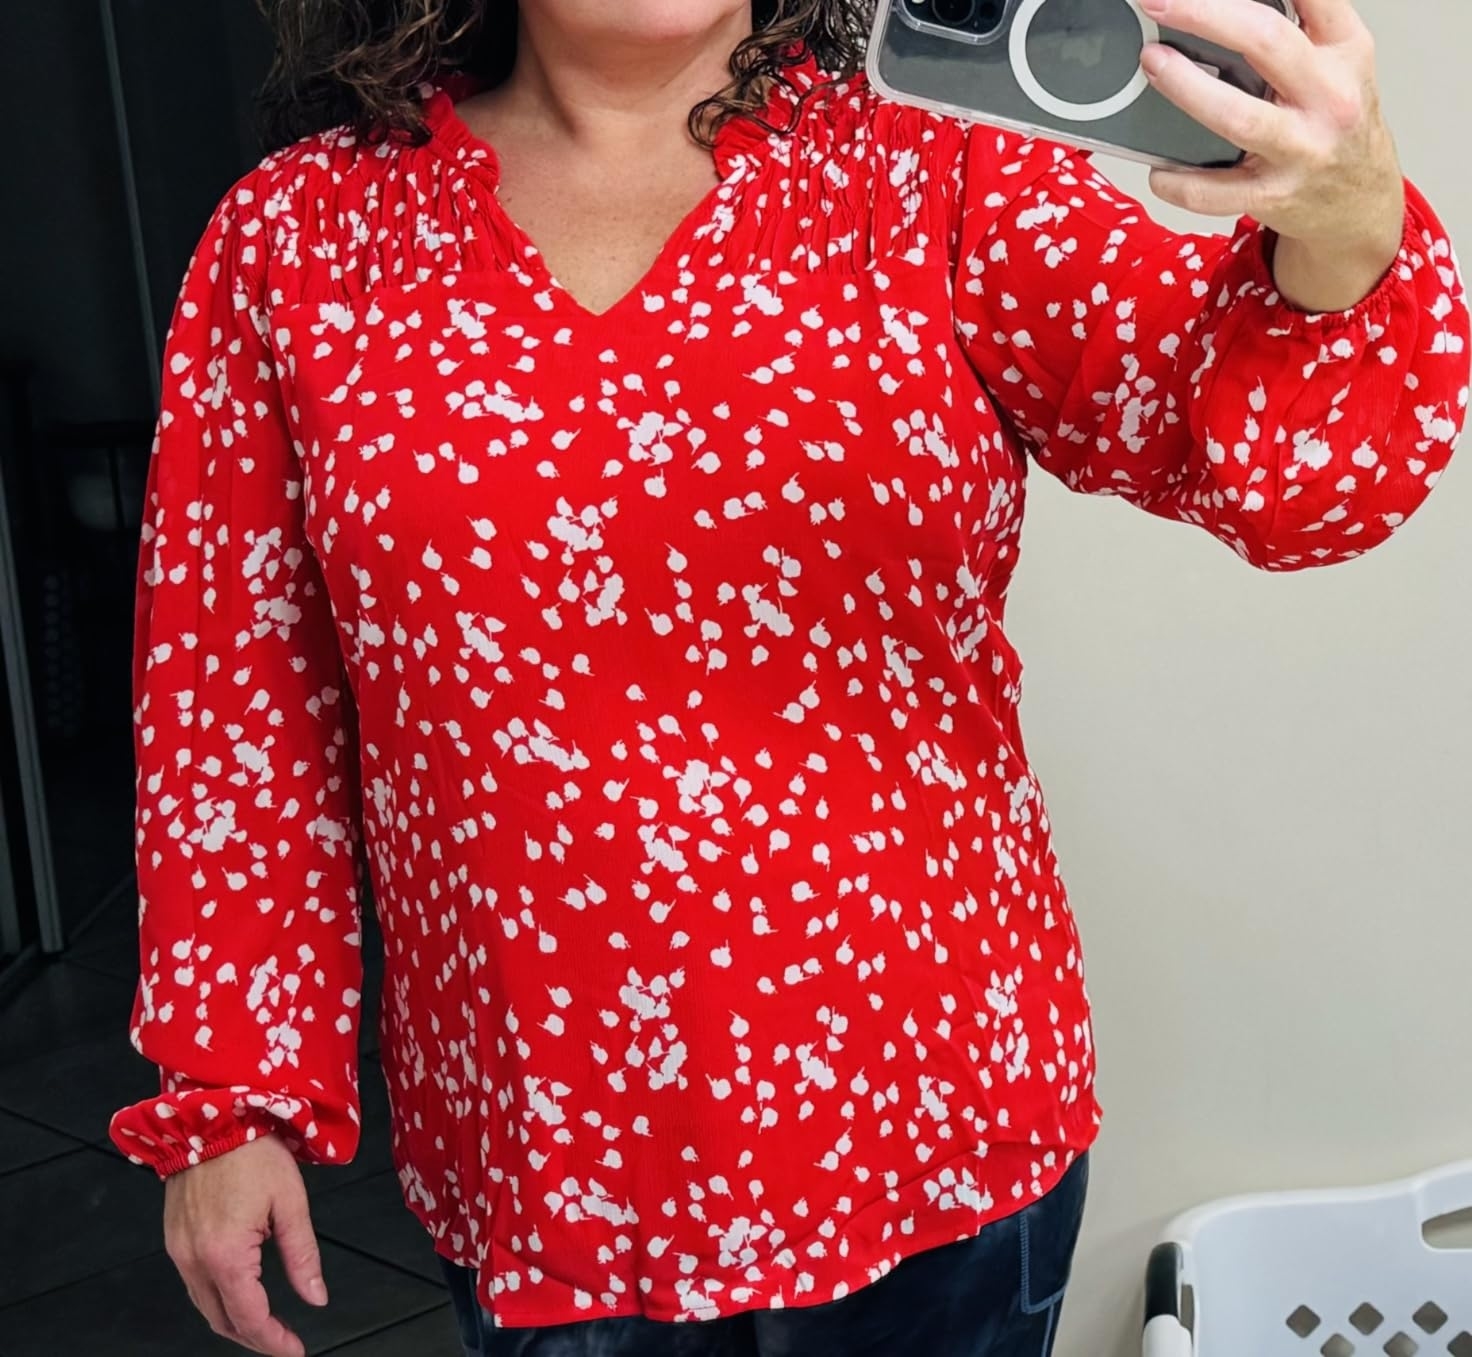 Reviewr taking a selfie wearing the patterned red blouse